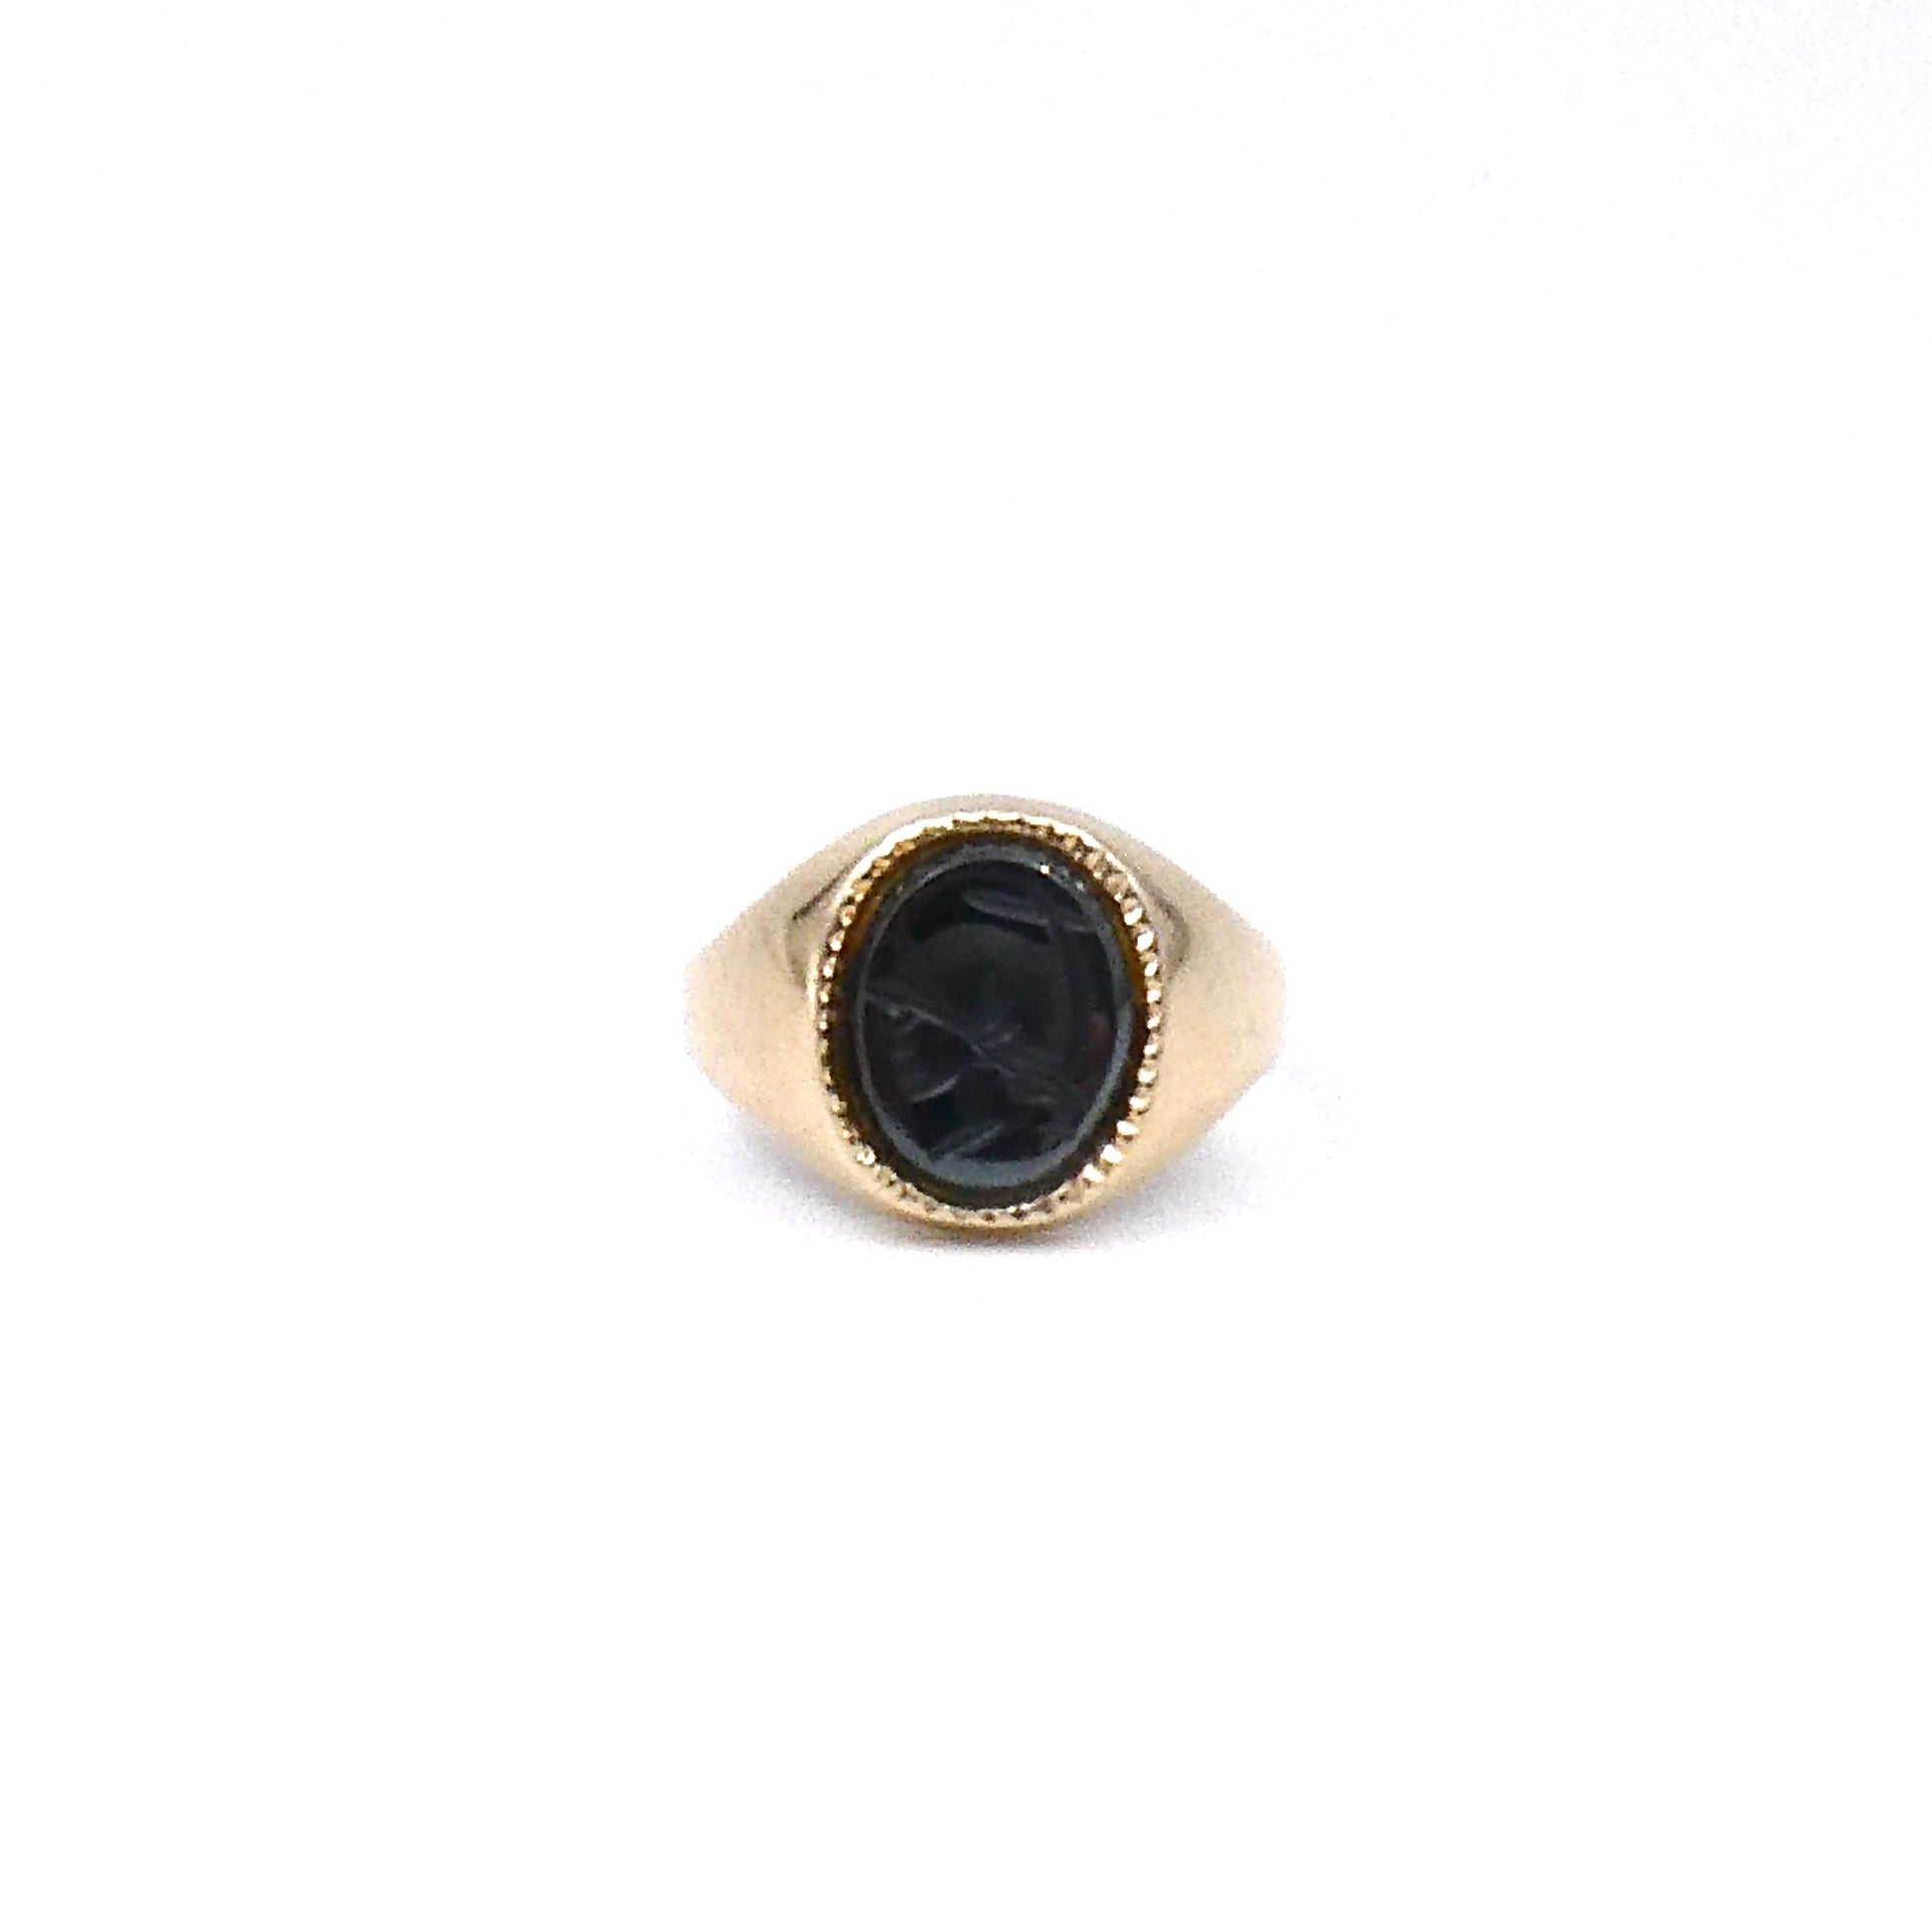 Hematite signet ring with an etched roman centurion head, 9kt gold ring. - Collected